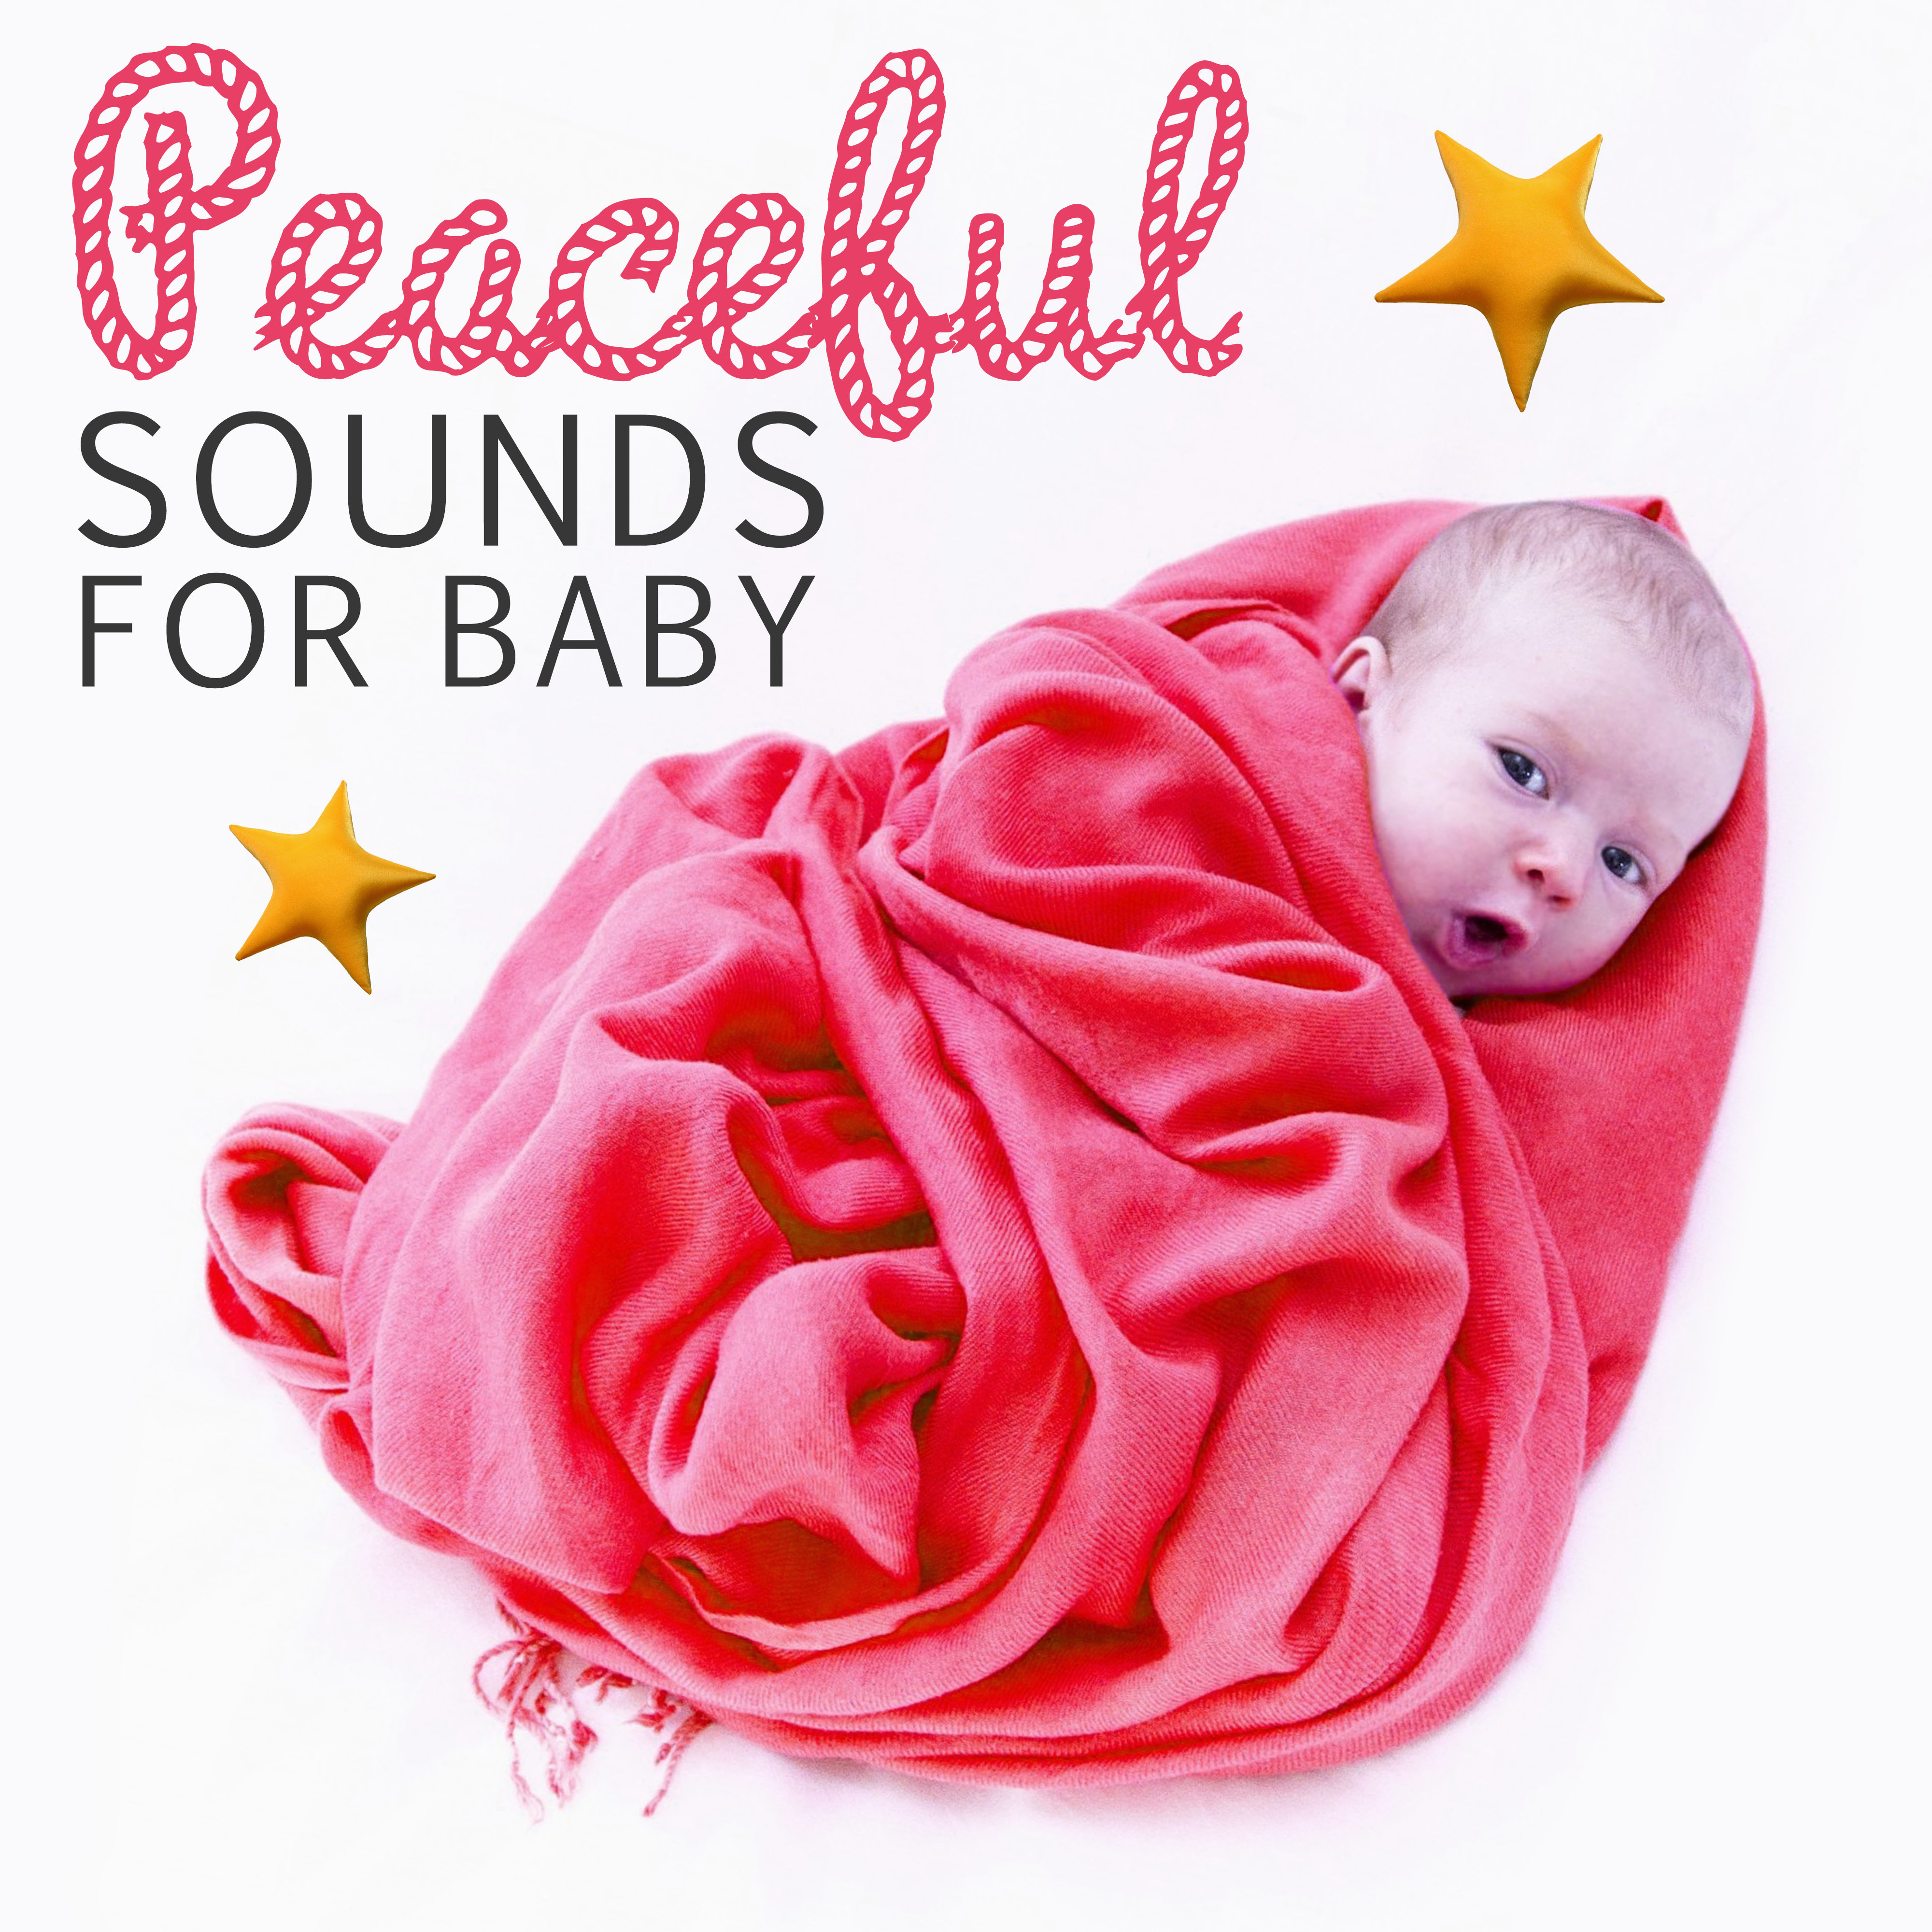 Peaceful Sounds for Baby -  Peaceful Sleep, Classical Calm Music to Bed